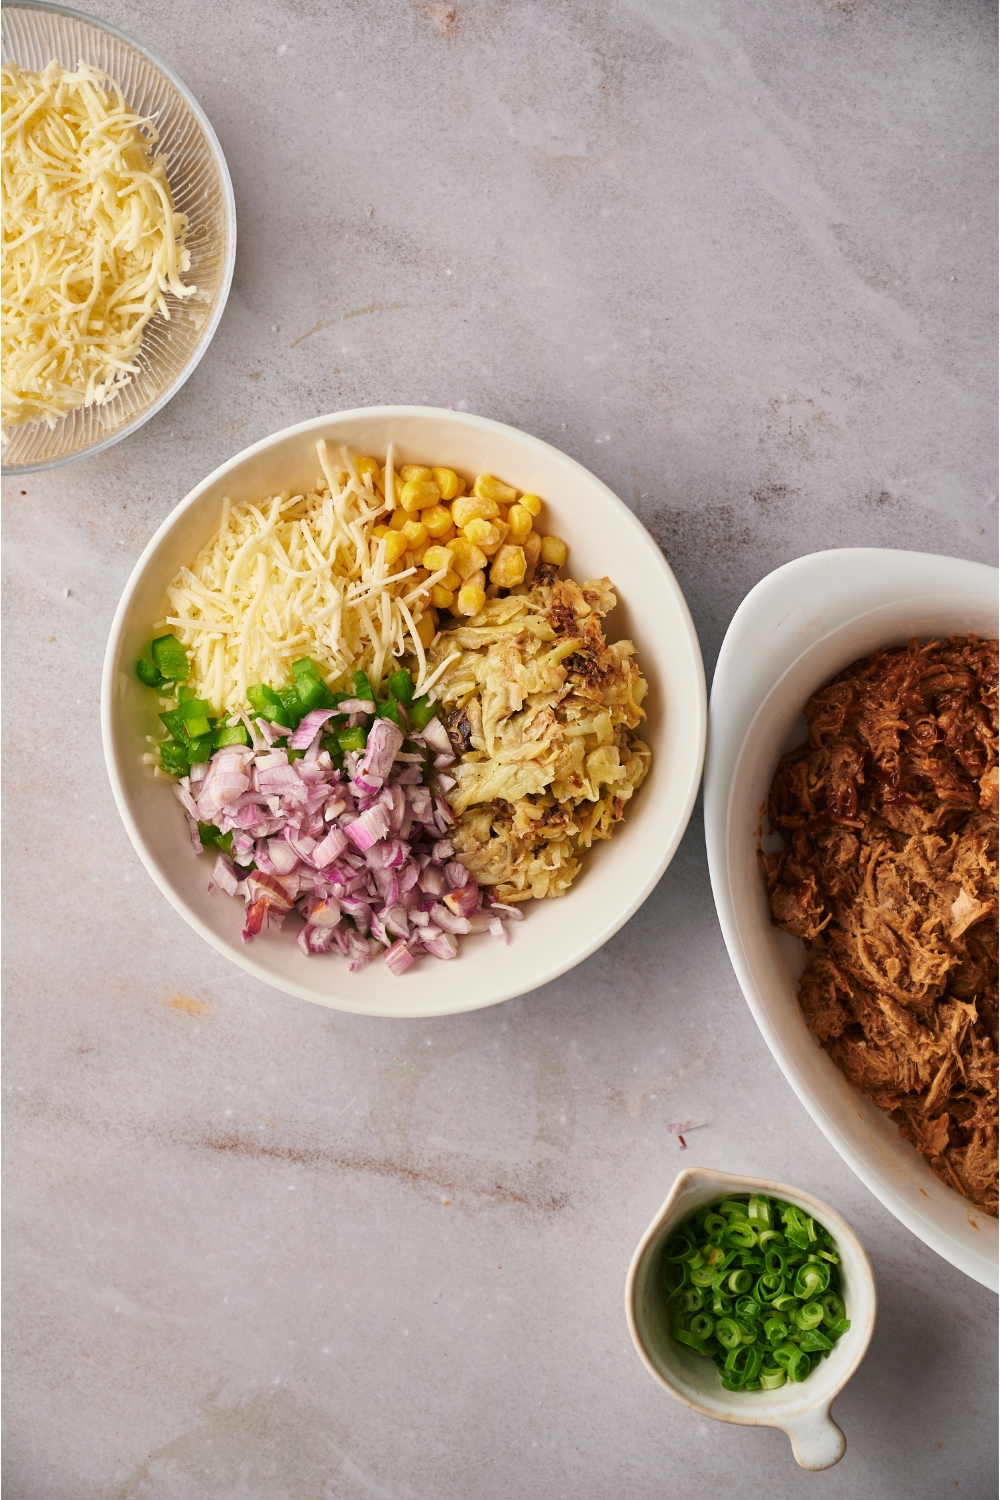 White bowl filled with shredded hash browns, diced onion, diced bell peppers, corn, and shredded cheese. Next to the bowl is a white baking dish filled with pulled pork, a small dish of green onions, and a bowl of shredded cheese.